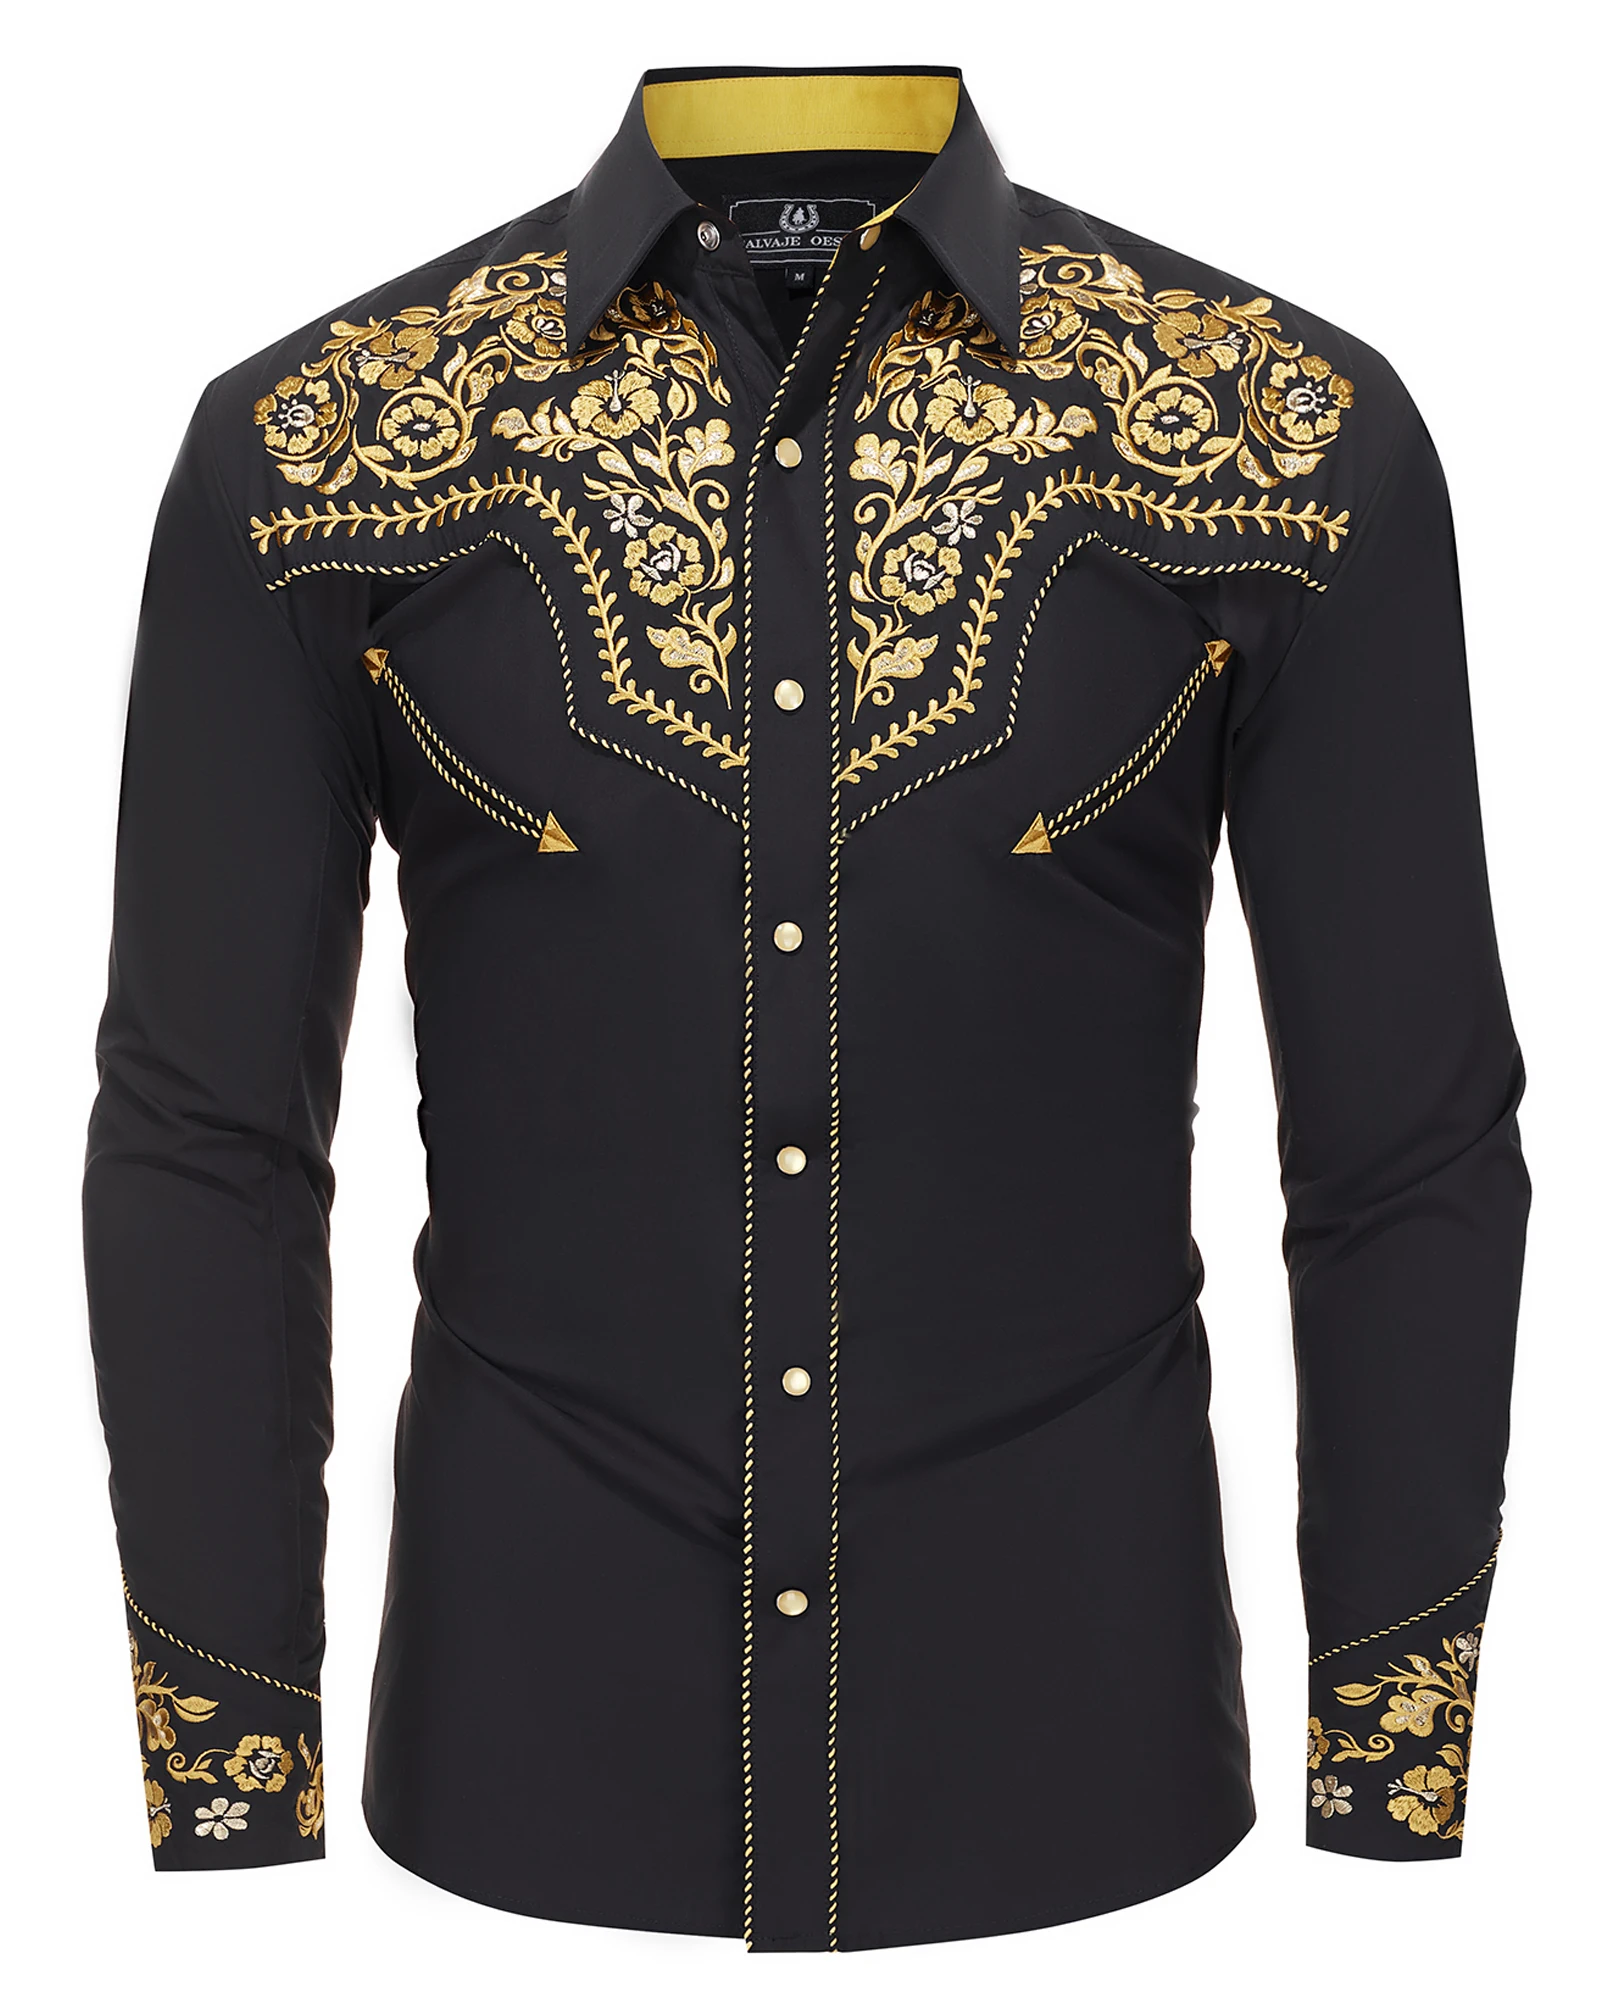 Men's Western Cowboy Shirt Long Sleeve Slim Fit Embroidered Fashion ...